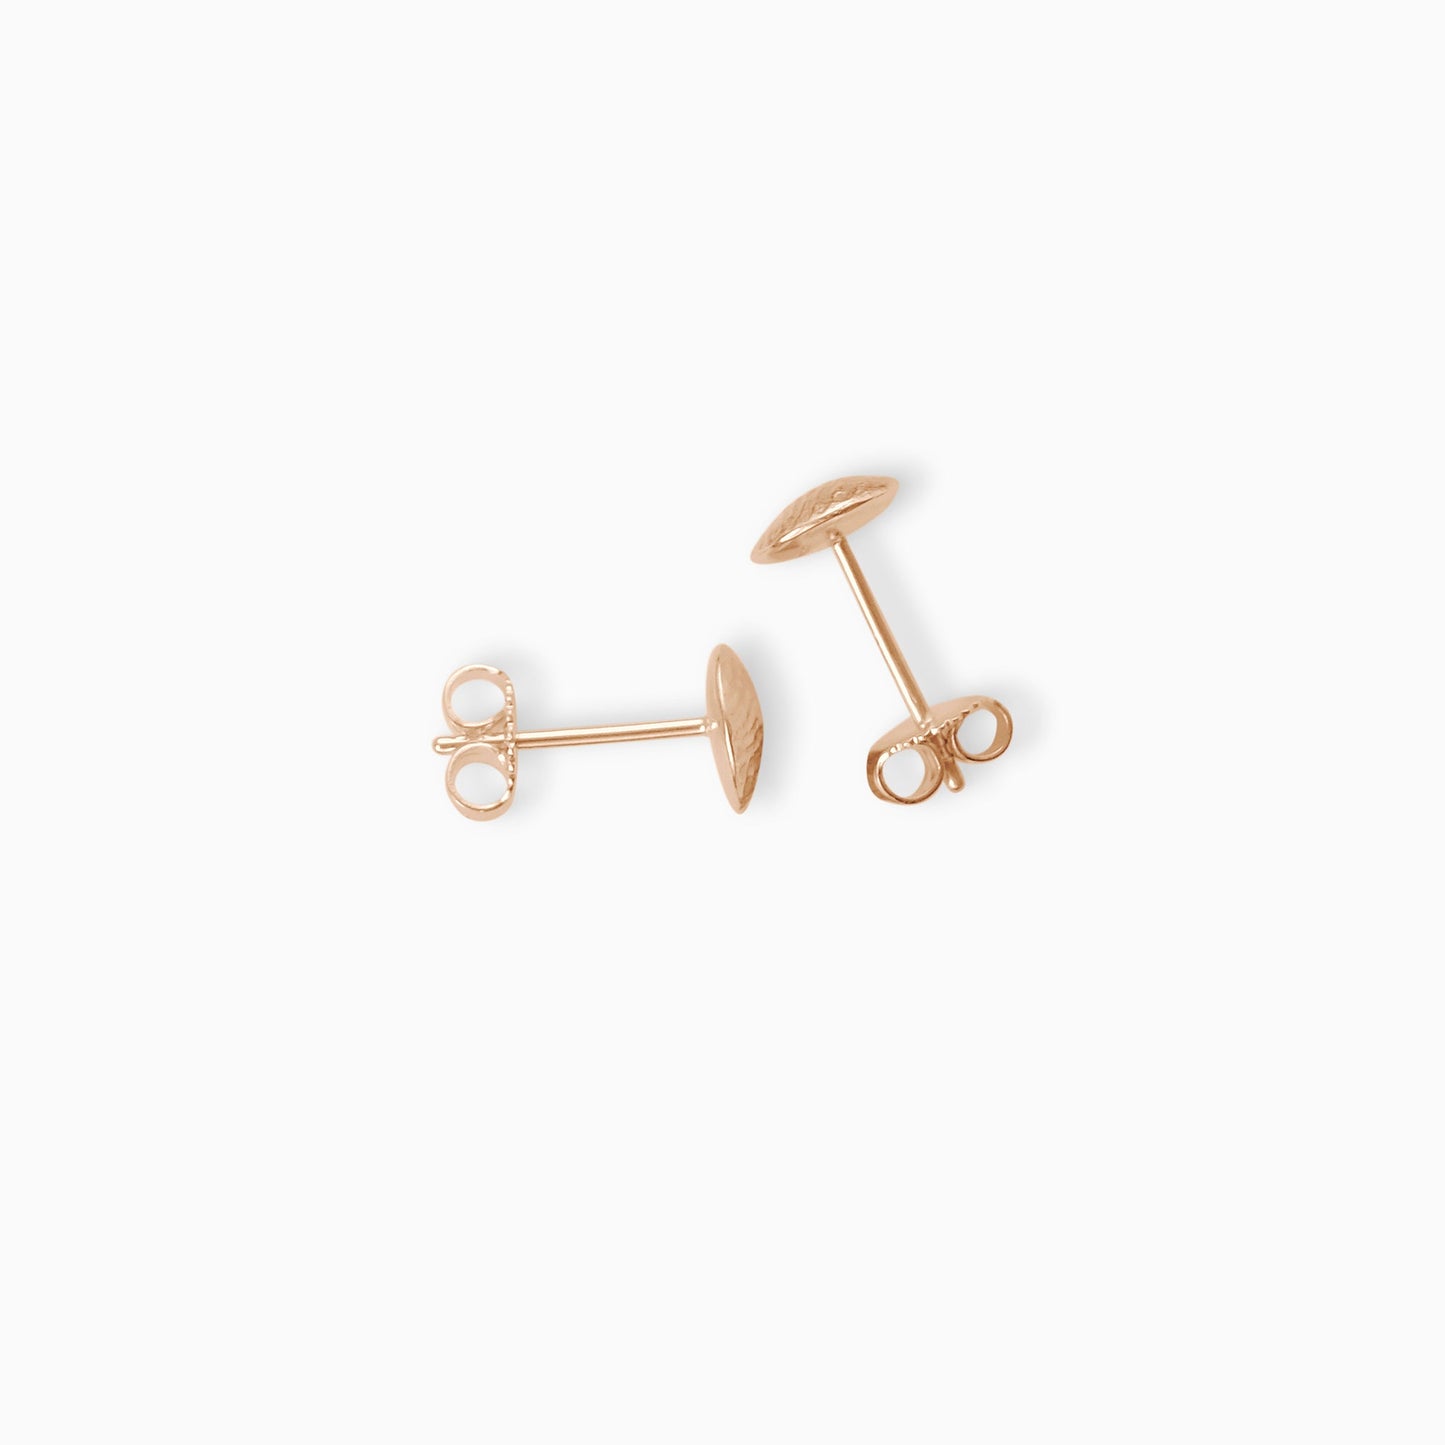 A pair of dainty 18ct Fairtrade rose gold disc shaped stud earrings. A soft pattern of diagonal lines across a slightly domed surface. 7mm diameter.